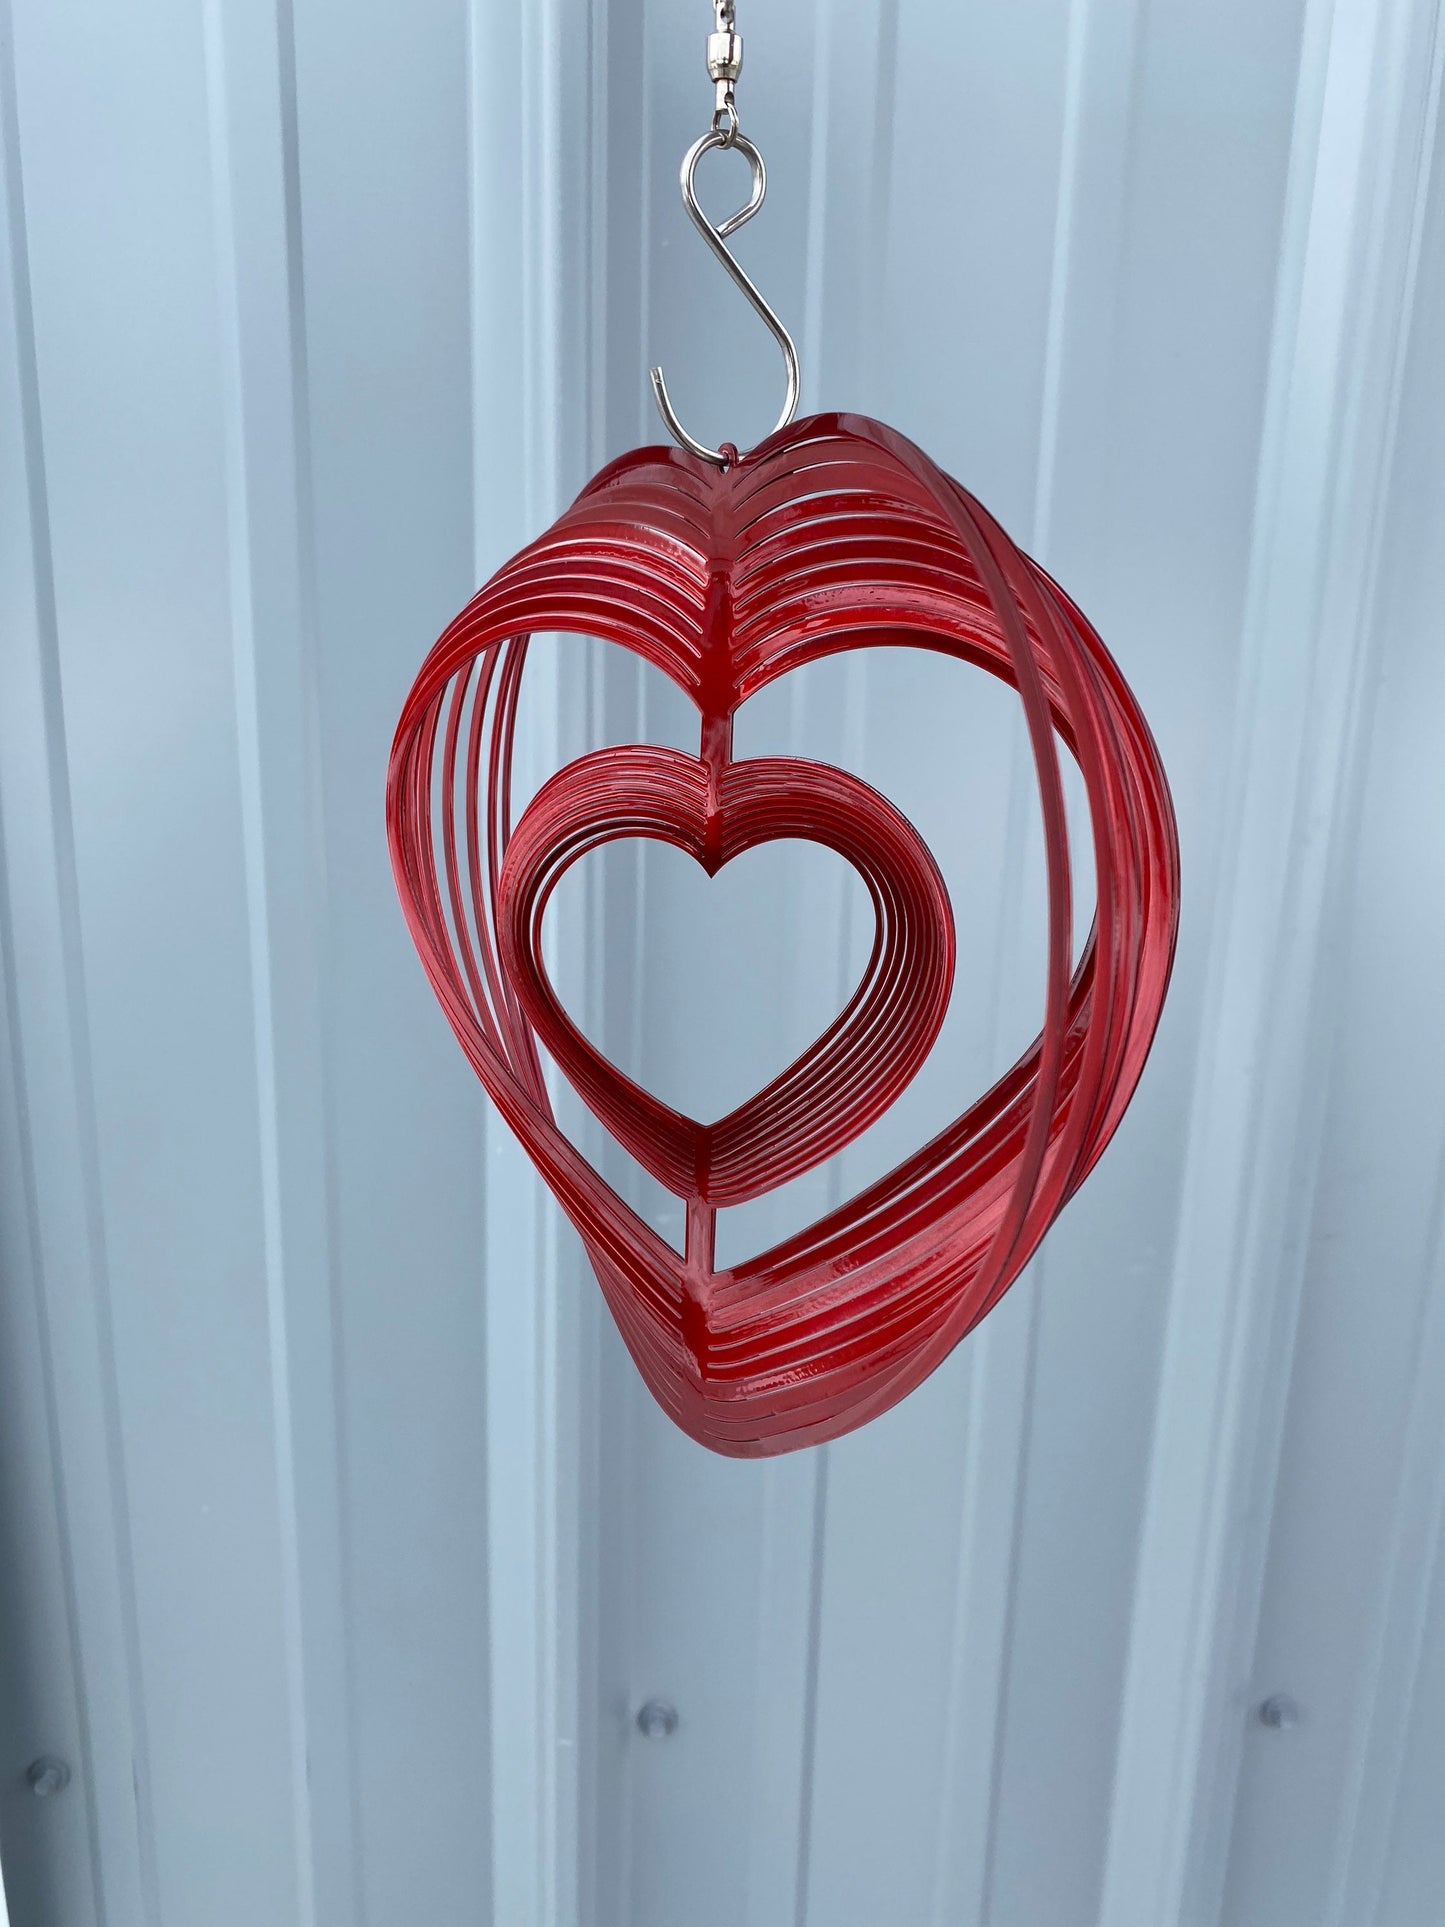 Double heart wind spinner, love, Valentine’s Day Gift, Mothers Day gifts, garden decor,